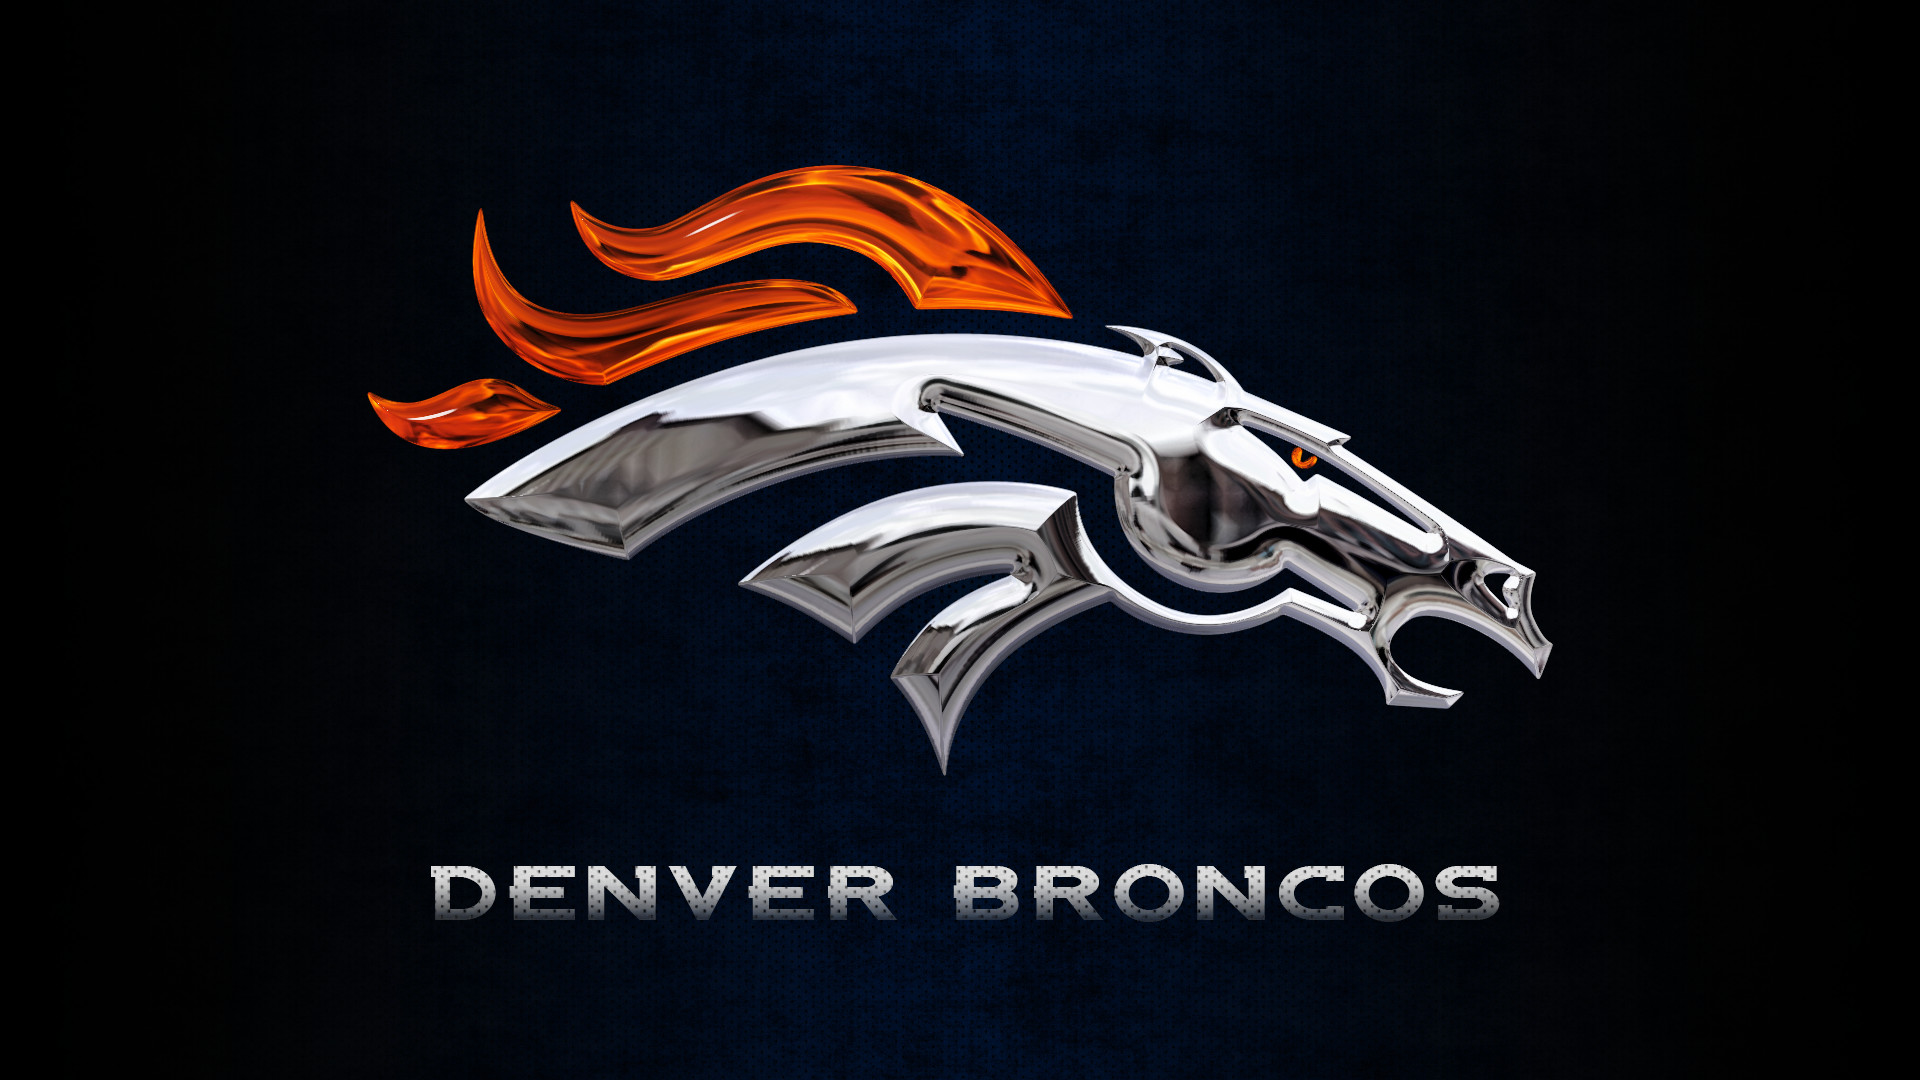 1920x1080 Related Wallpapers from Tapout Wallpaper. Broncos Wallpaper